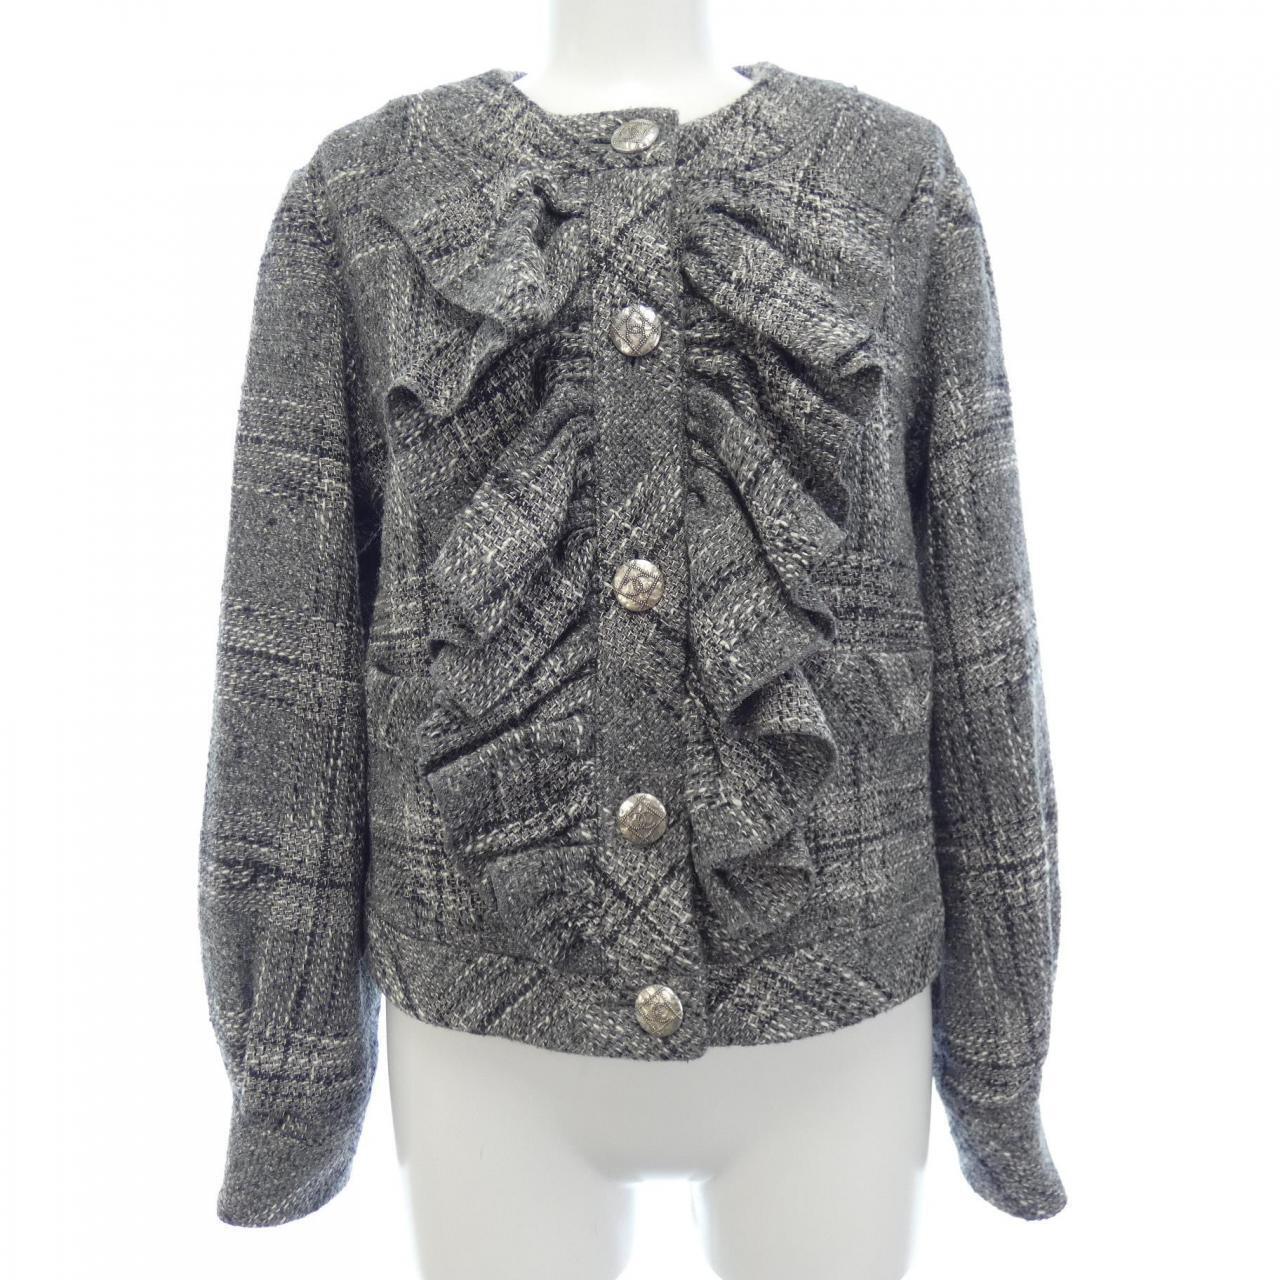 EPPLI  CHANEL jacket size 38 coll Fall 2013 READY TO WEAR  purchase  online